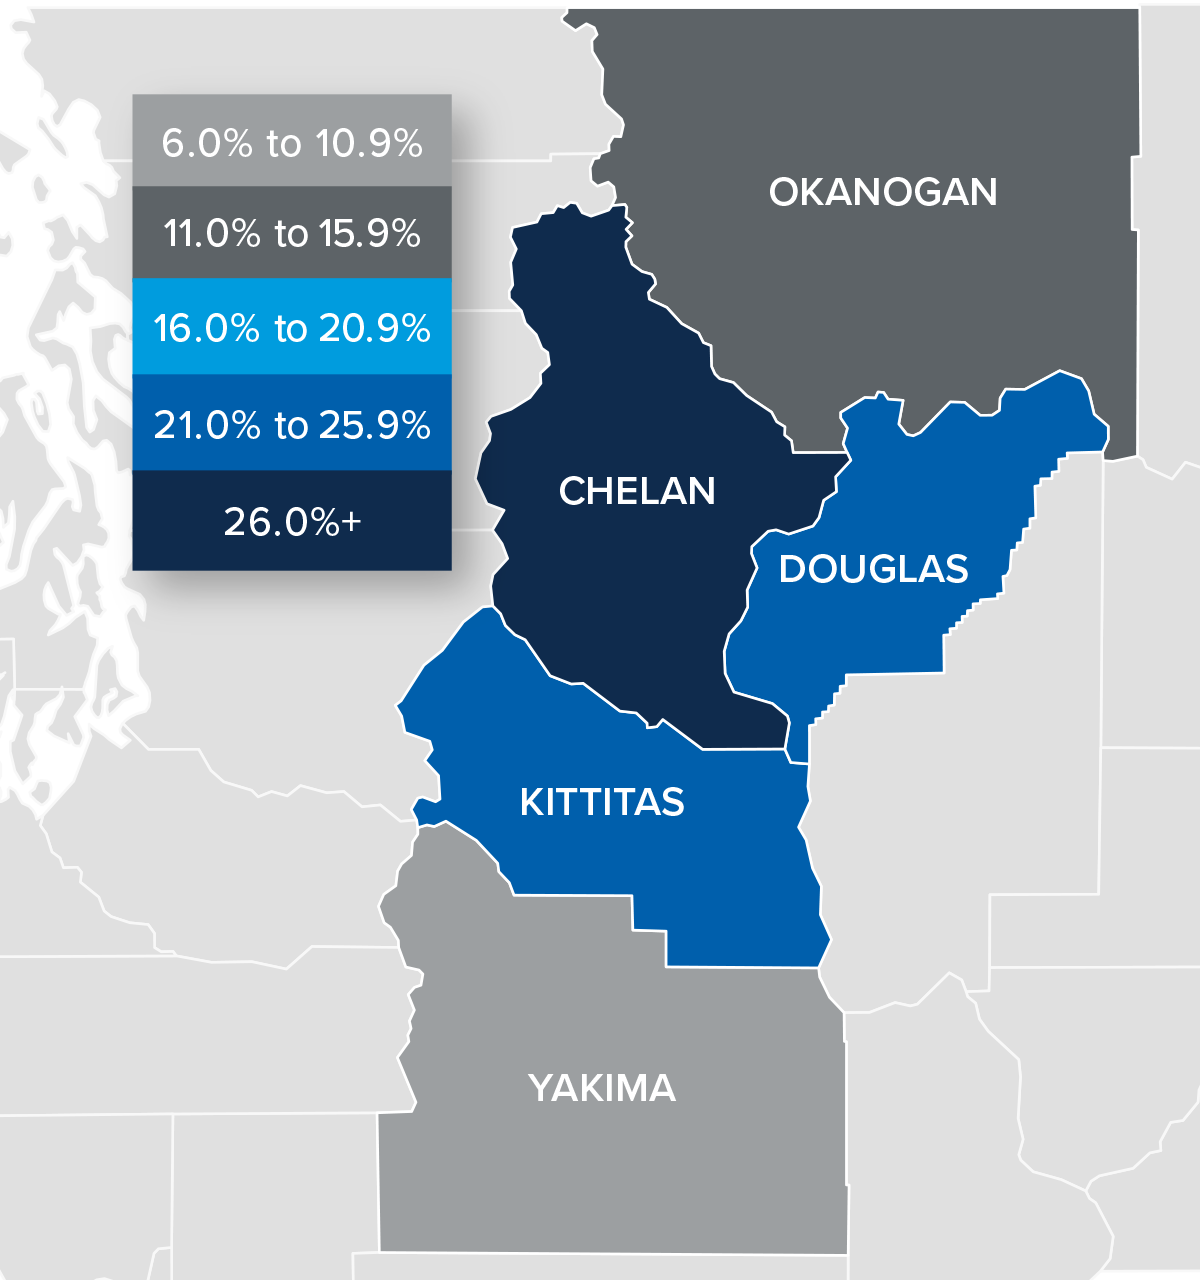 A map showing the year-over-year real estate market percentage changes in various counties in Central Washington for Q1 2022.